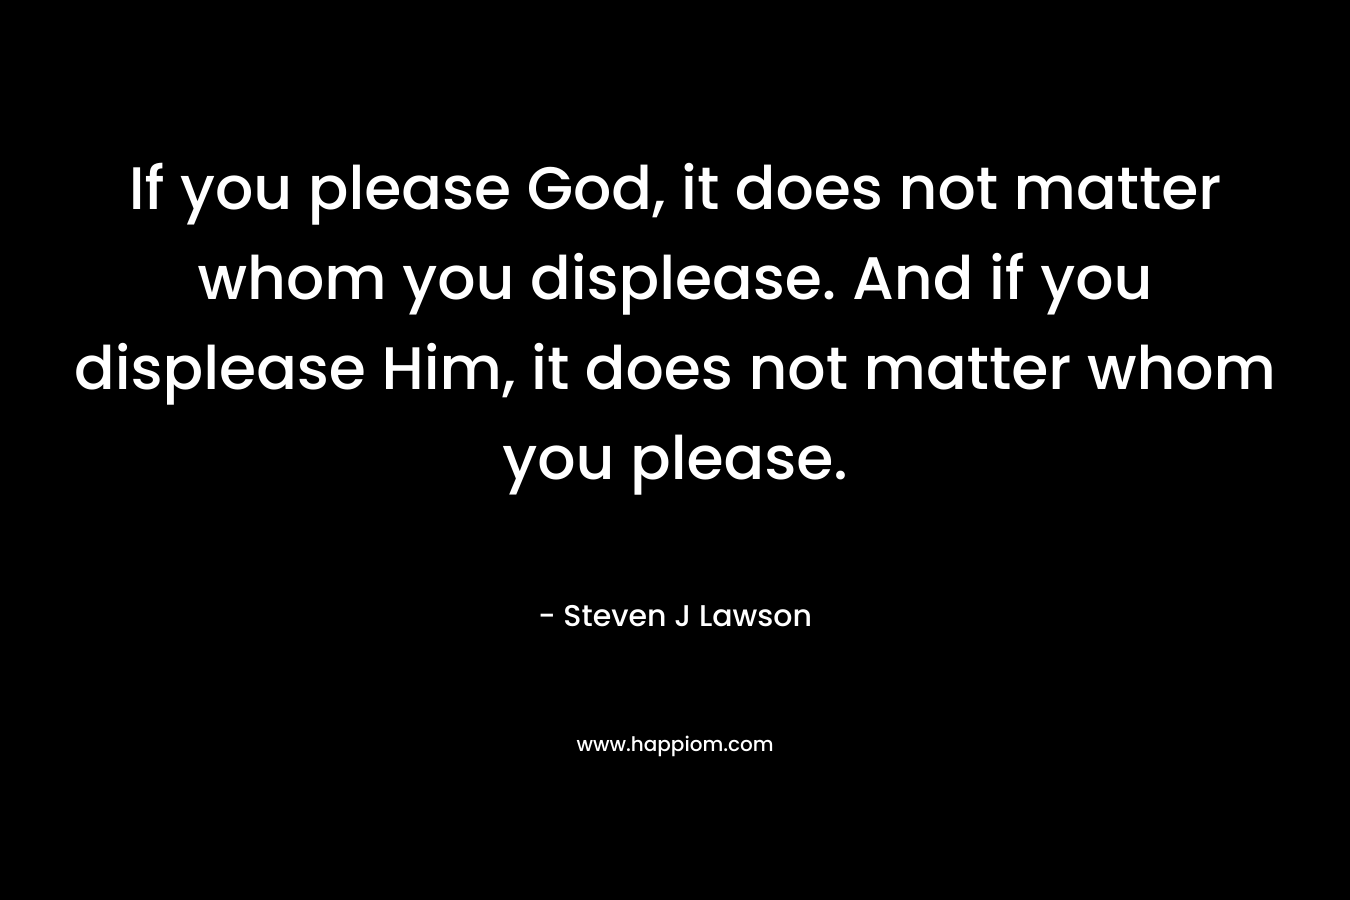 If you please God, it does not matter whom you displease. And if you displease Him, it does not matter whom you please. – Steven J Lawson